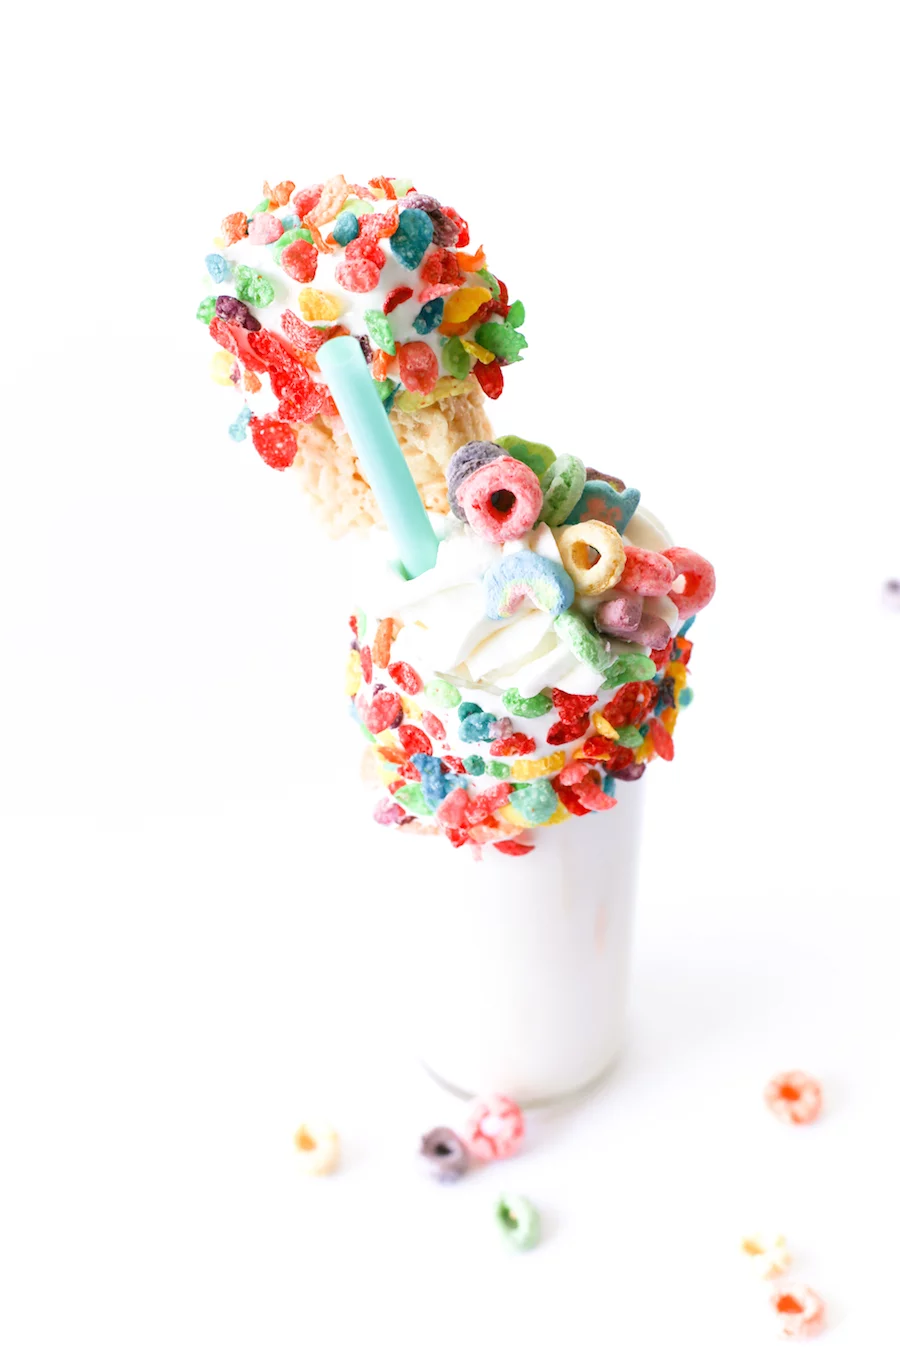 Splurge for breakfast or dessert with this cereal milk milkshake made with cereal-soaked milk, rice krispies treats, and a lot of marshmallow fluff! // Salty Canary 